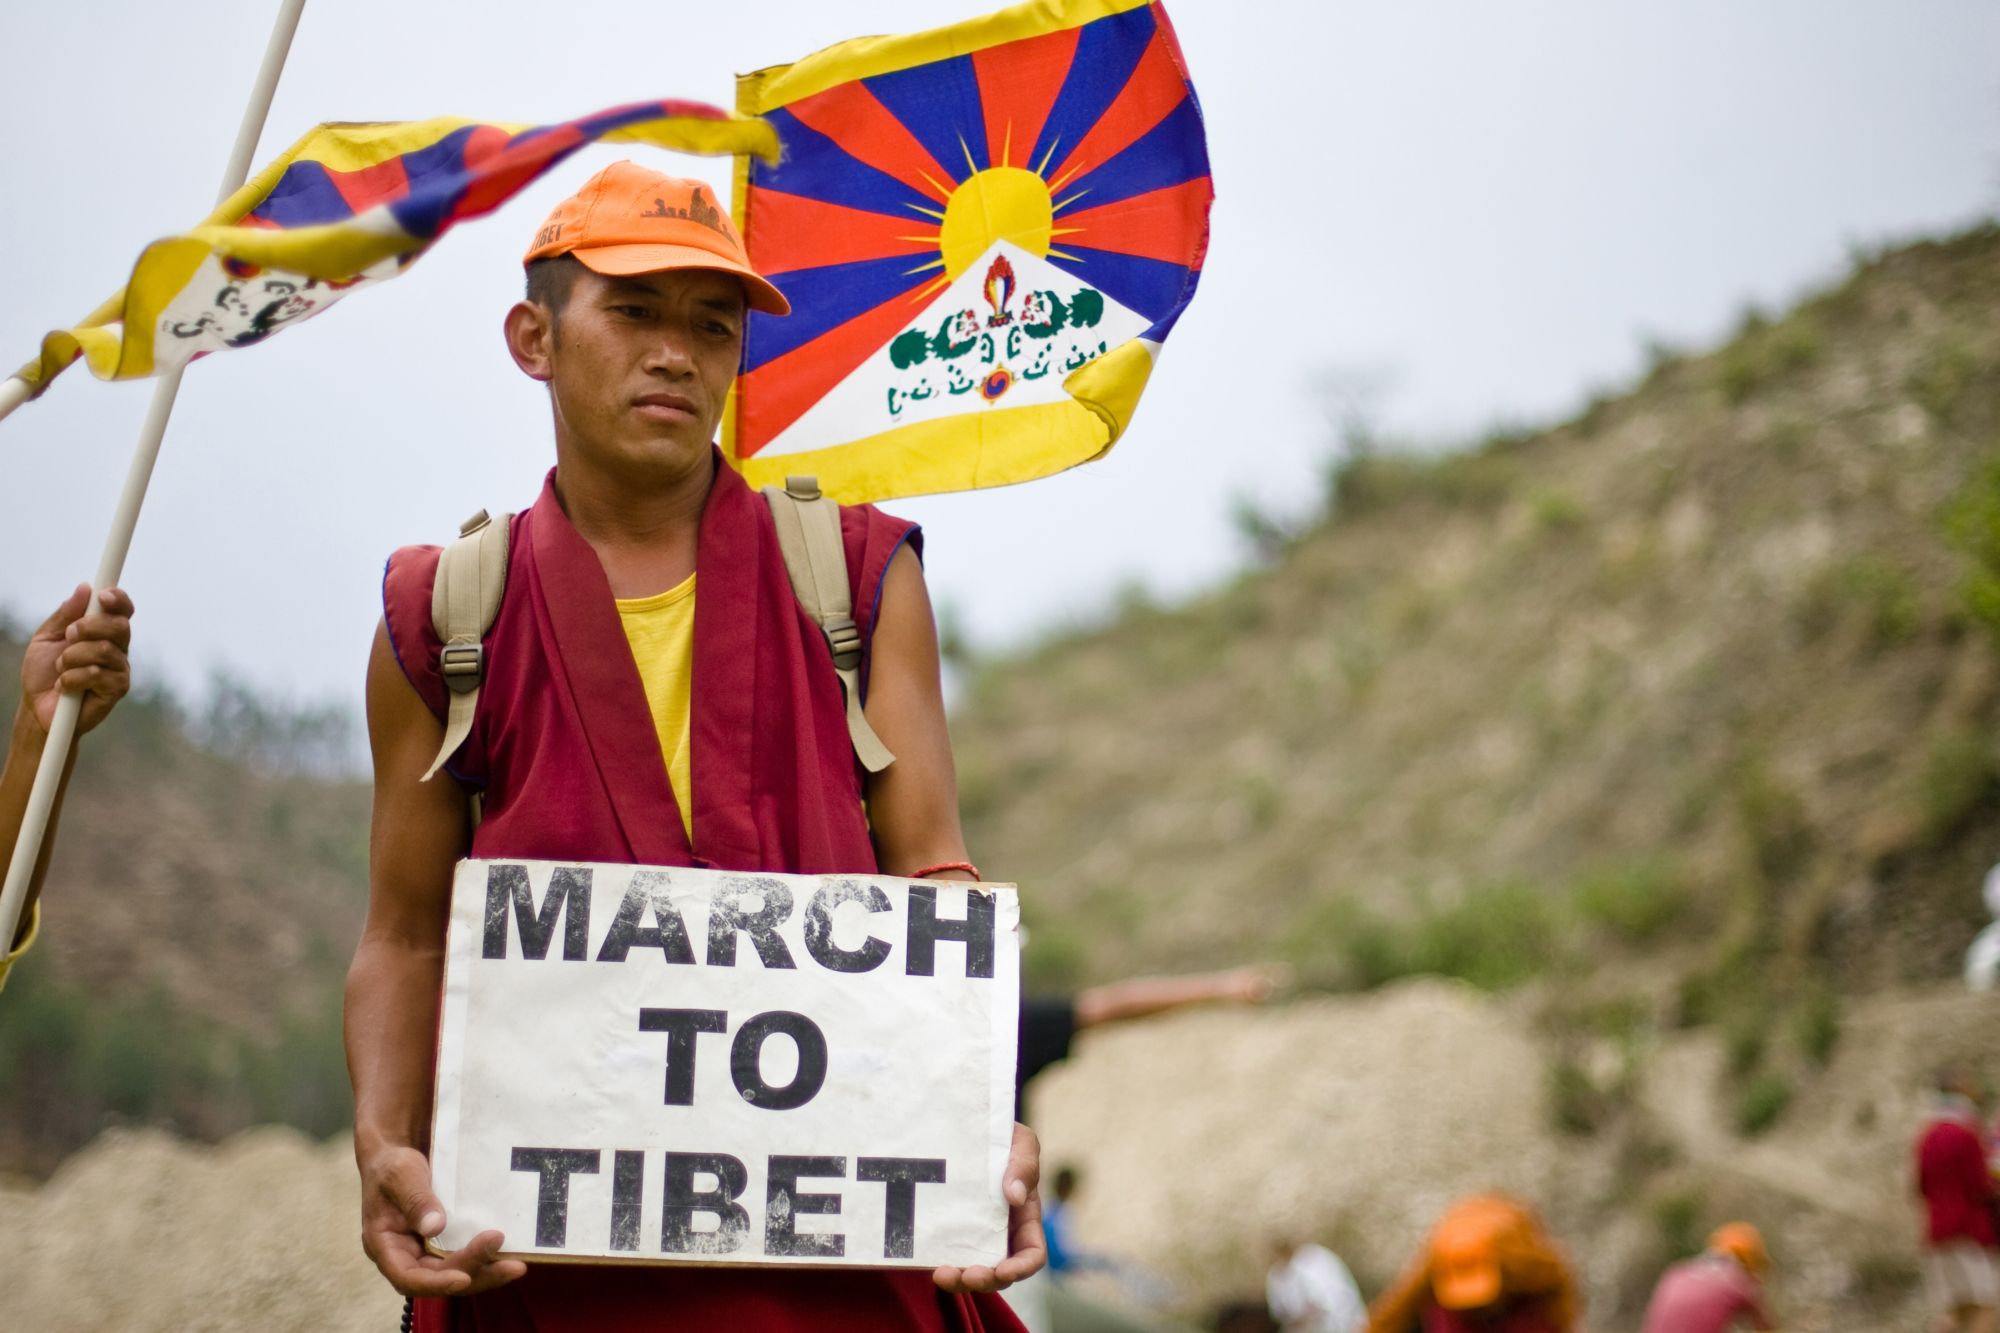 A scene from a march to Tibet led by exiled monks and activists